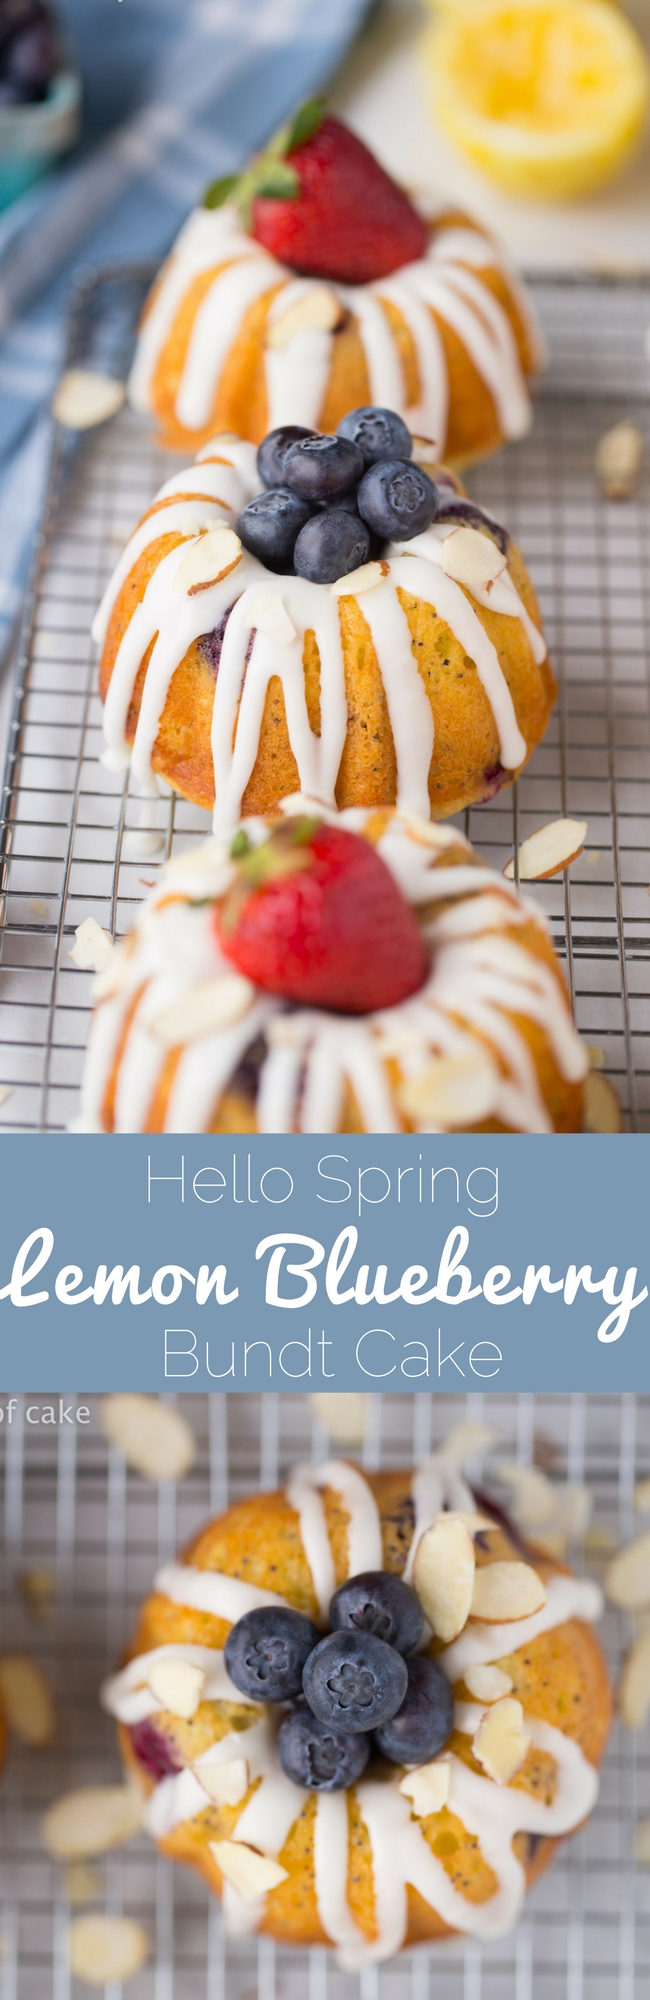 The Ultimate Lemon Blueberry Bundt Cakes with Poppy Seeds and Almond Glaze, WOW this recipe is easy and awesome!